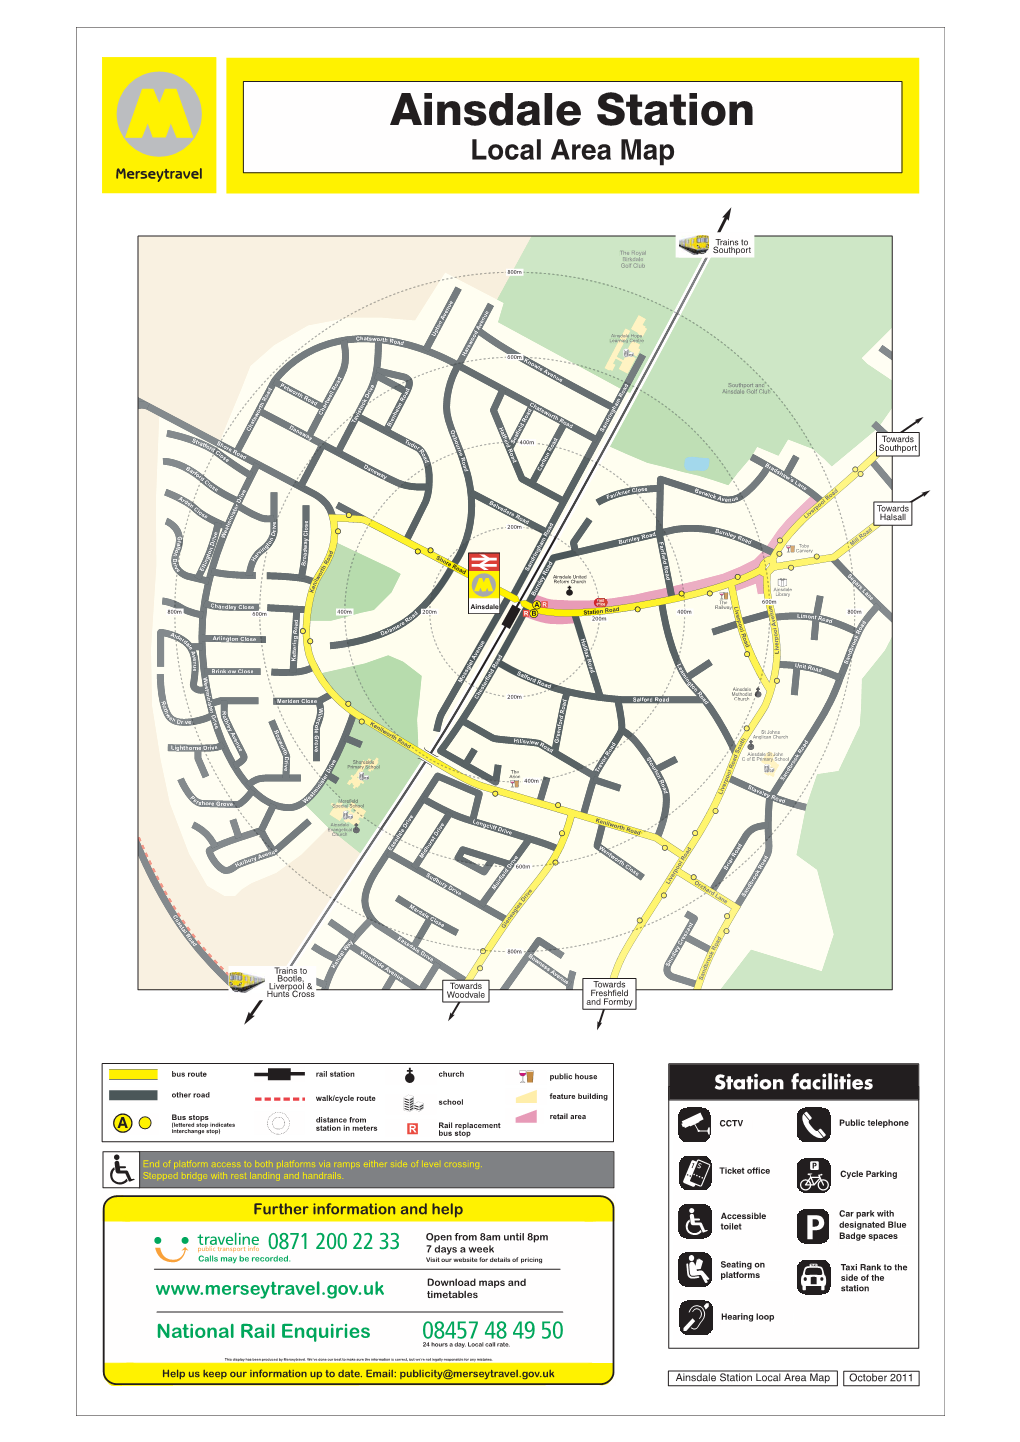 Ainsdale Station Local Area Map